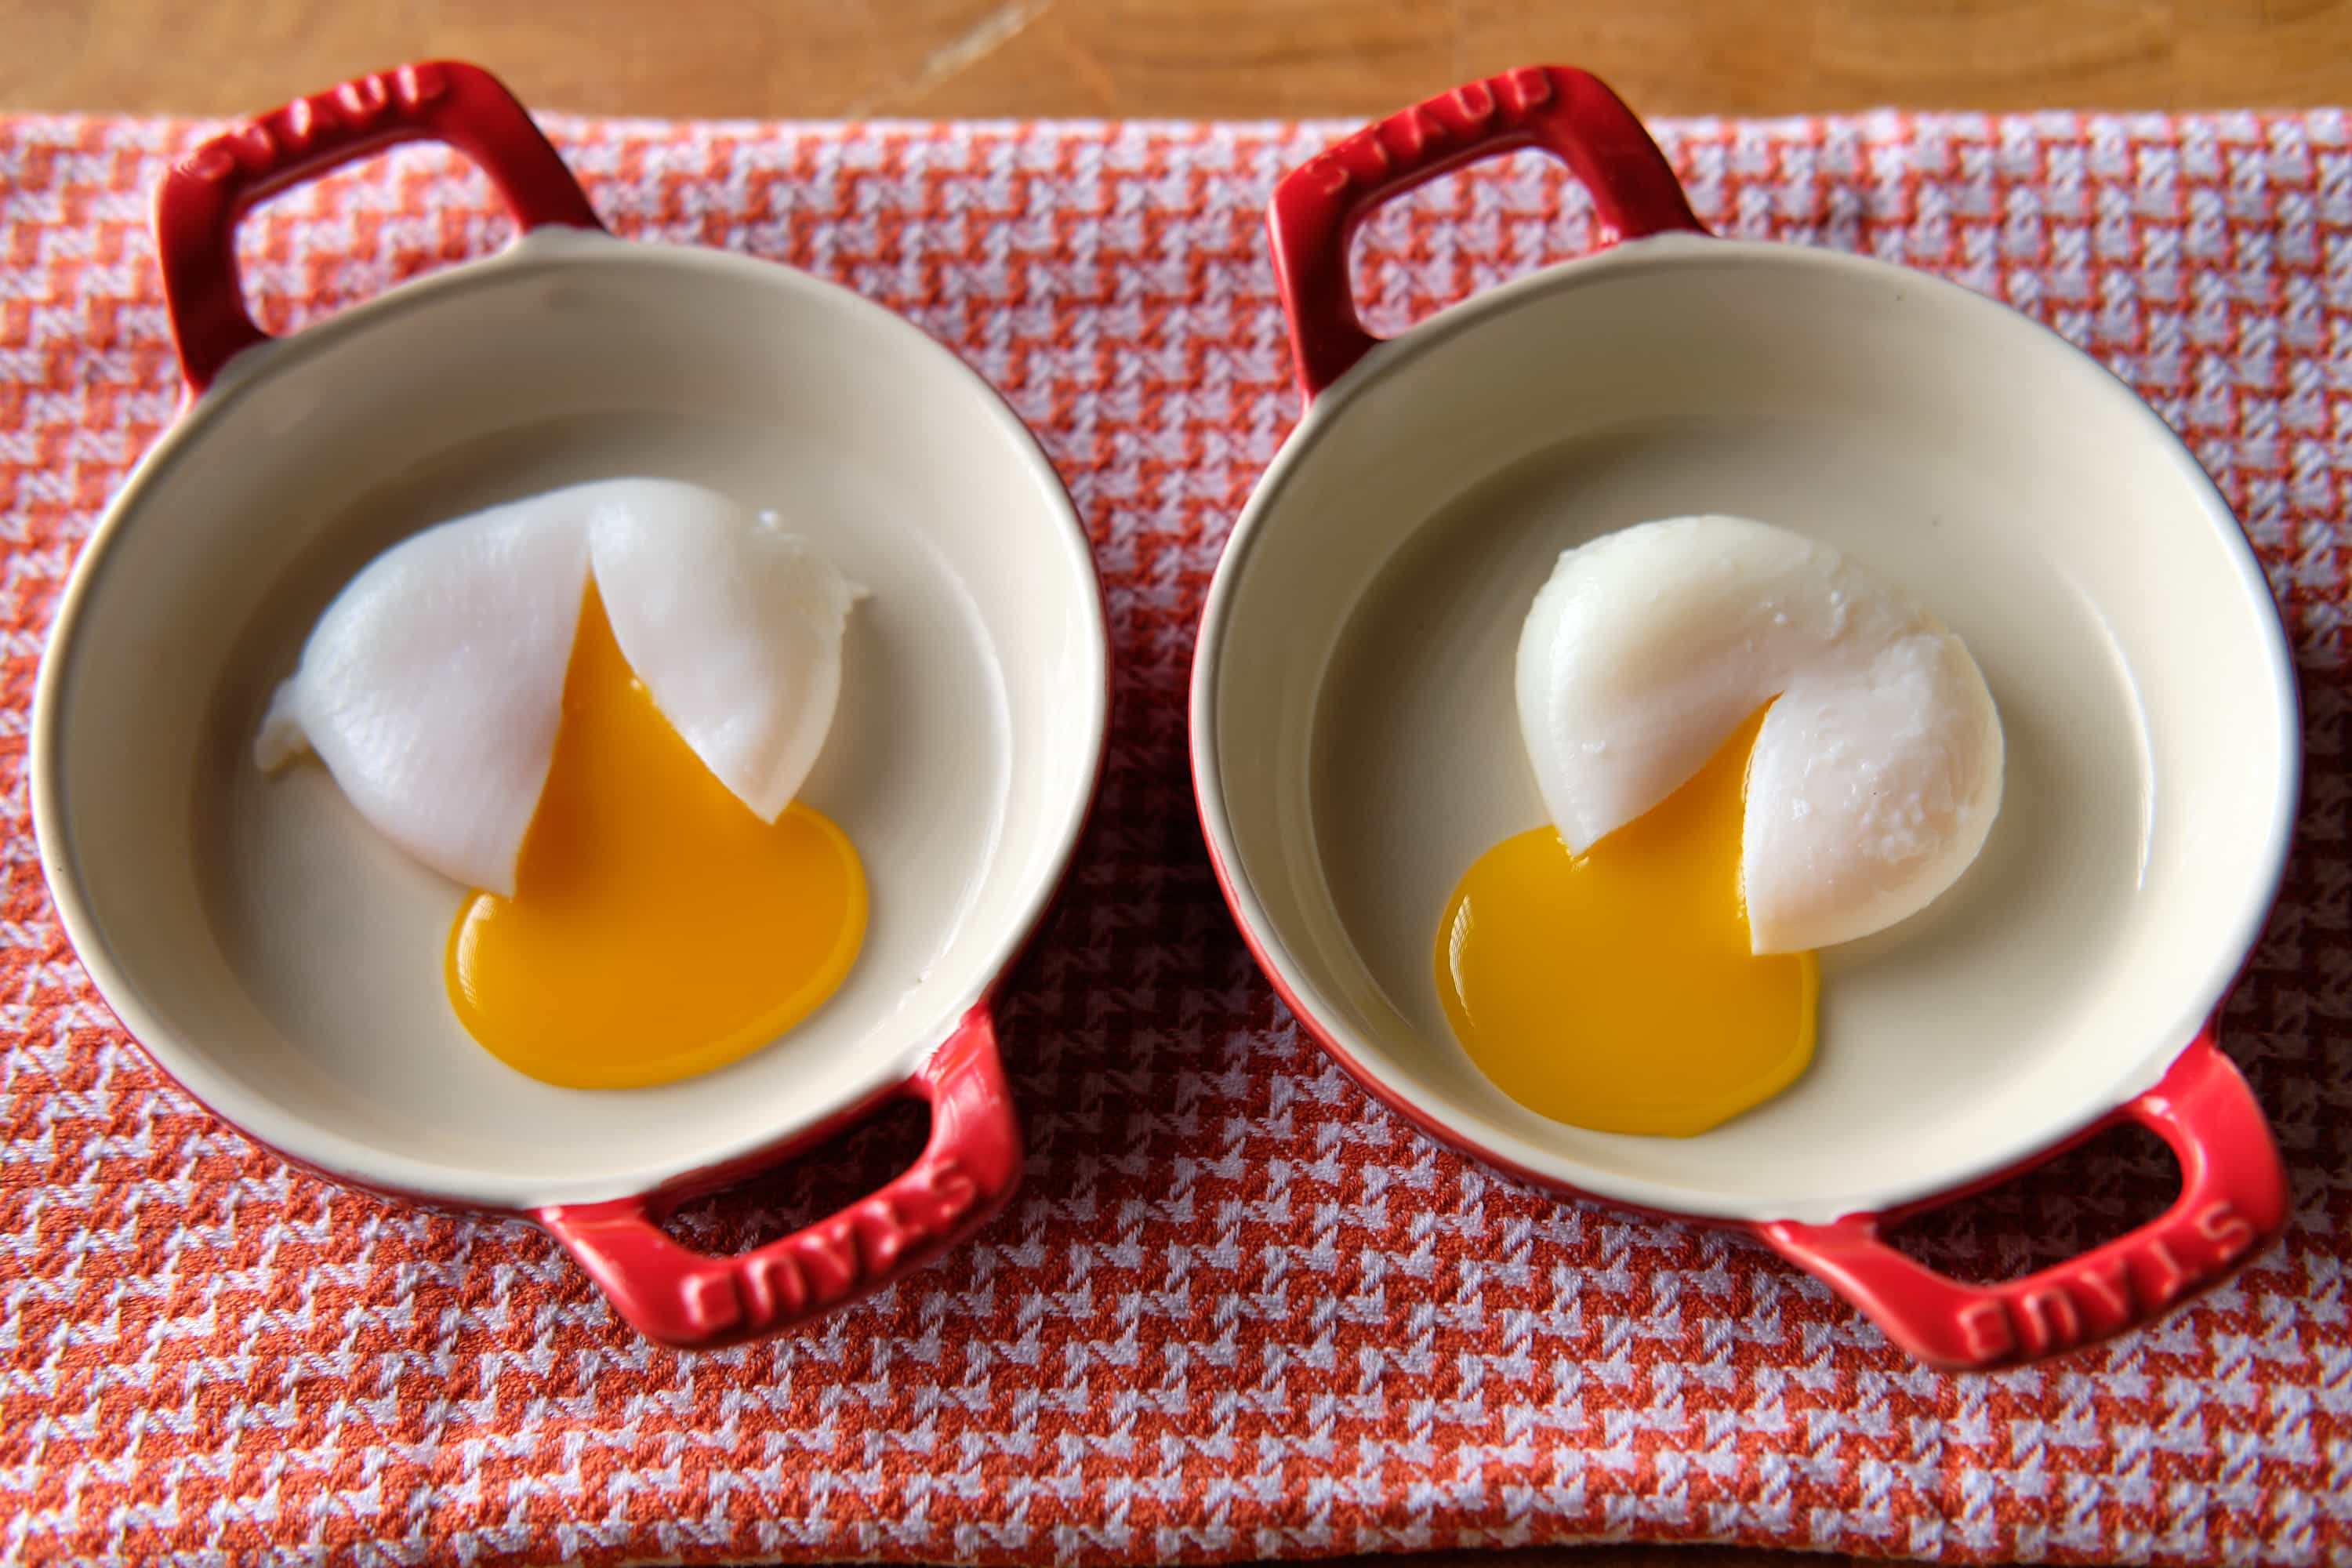 Soft Cooked Eggs - Sousvide